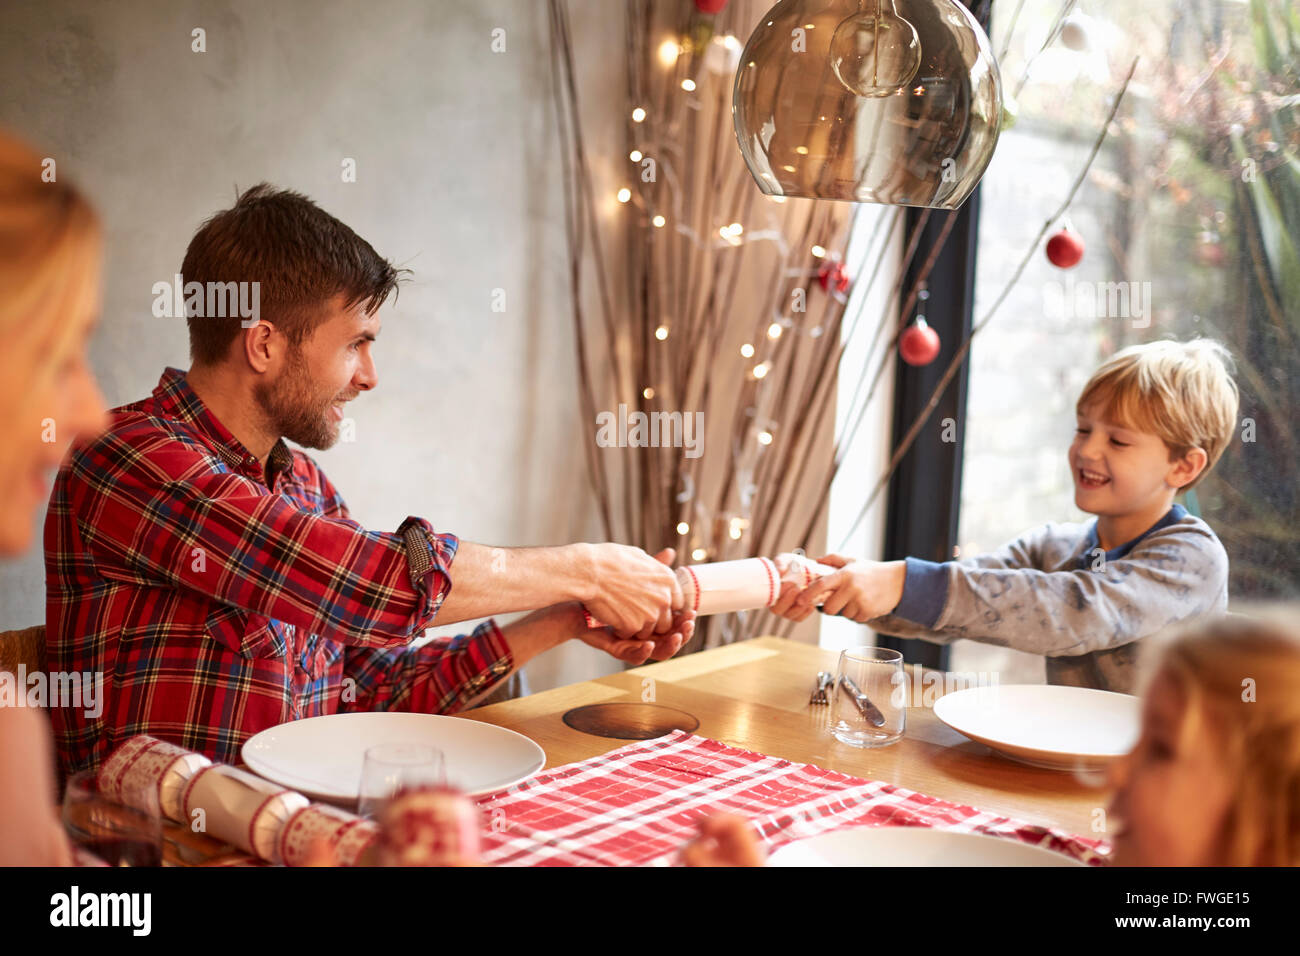 A family of four people, two adults and two children seated around  a table at Christmas time, pulling crackers. Stock Photo